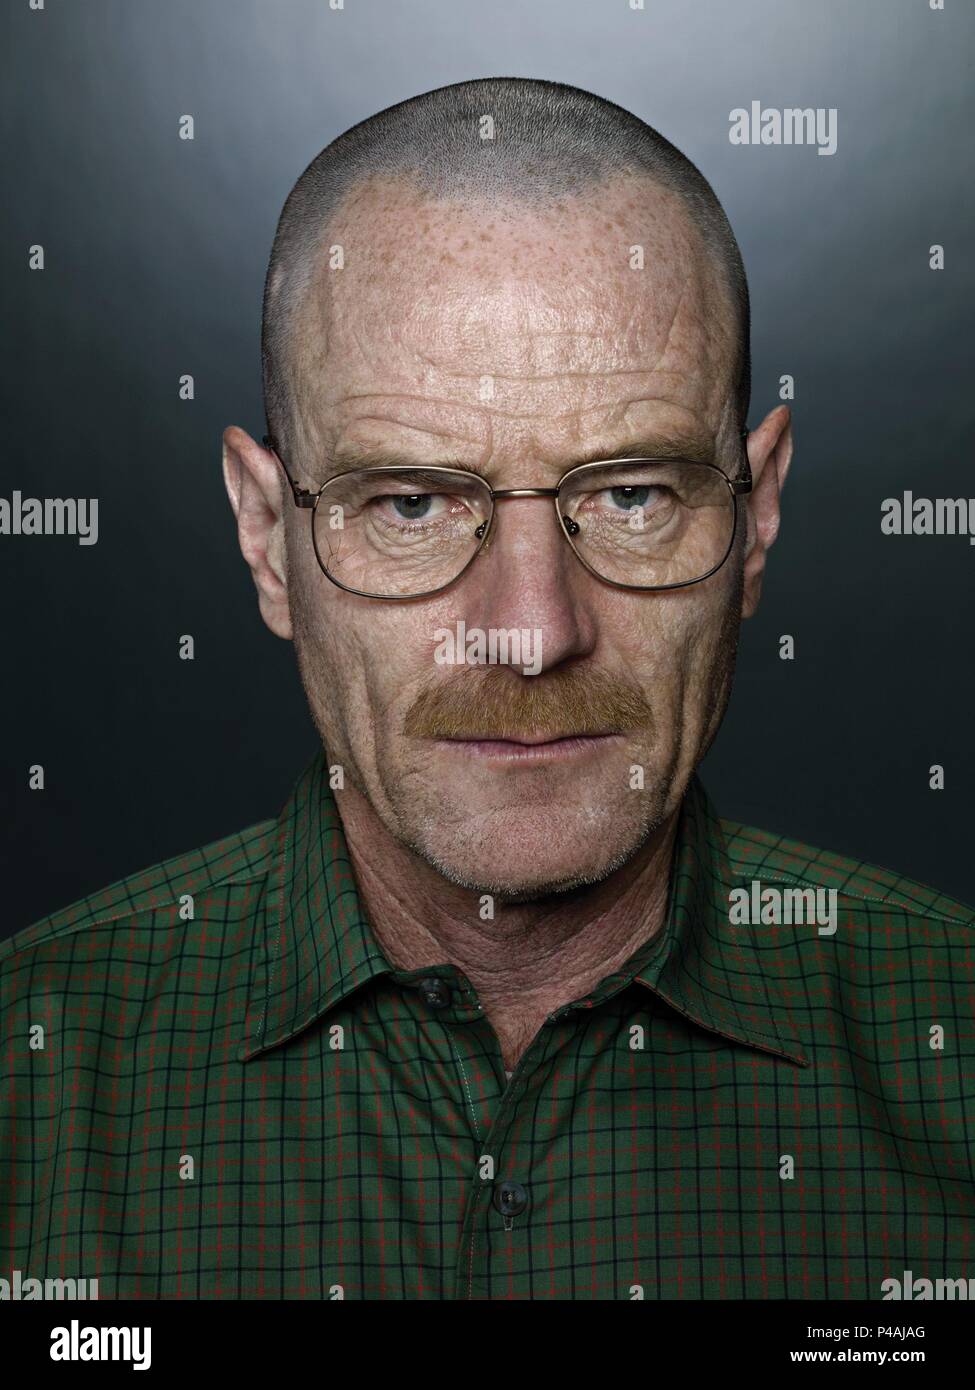 Original Film Title: BREAKING BAD.  English Title: BREAKING BAD.  Film Director: VINCE GILLIGAN.  Year: 2008.  Stars: BRYAN CRANSTON. Credit: SONY PICTURES TELEVISION/ACME SHARK/MGM TELEVISION/PEGASUS / Album Stock Photo